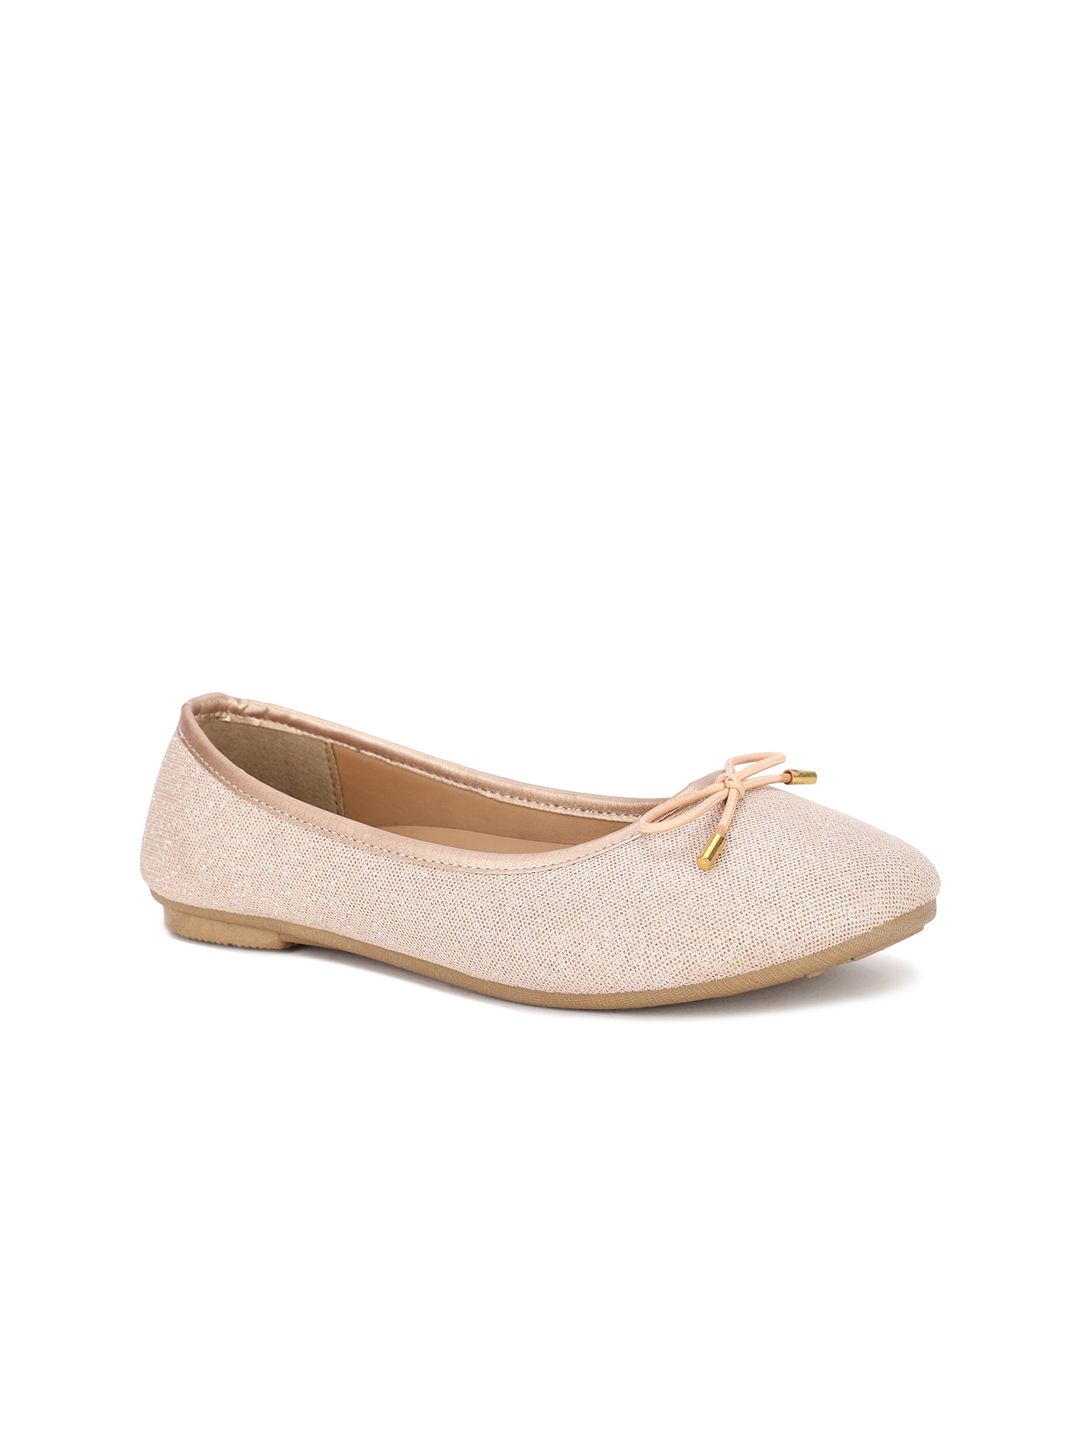 Bata Women Pink Ballerinas with Bows Flats Price in India